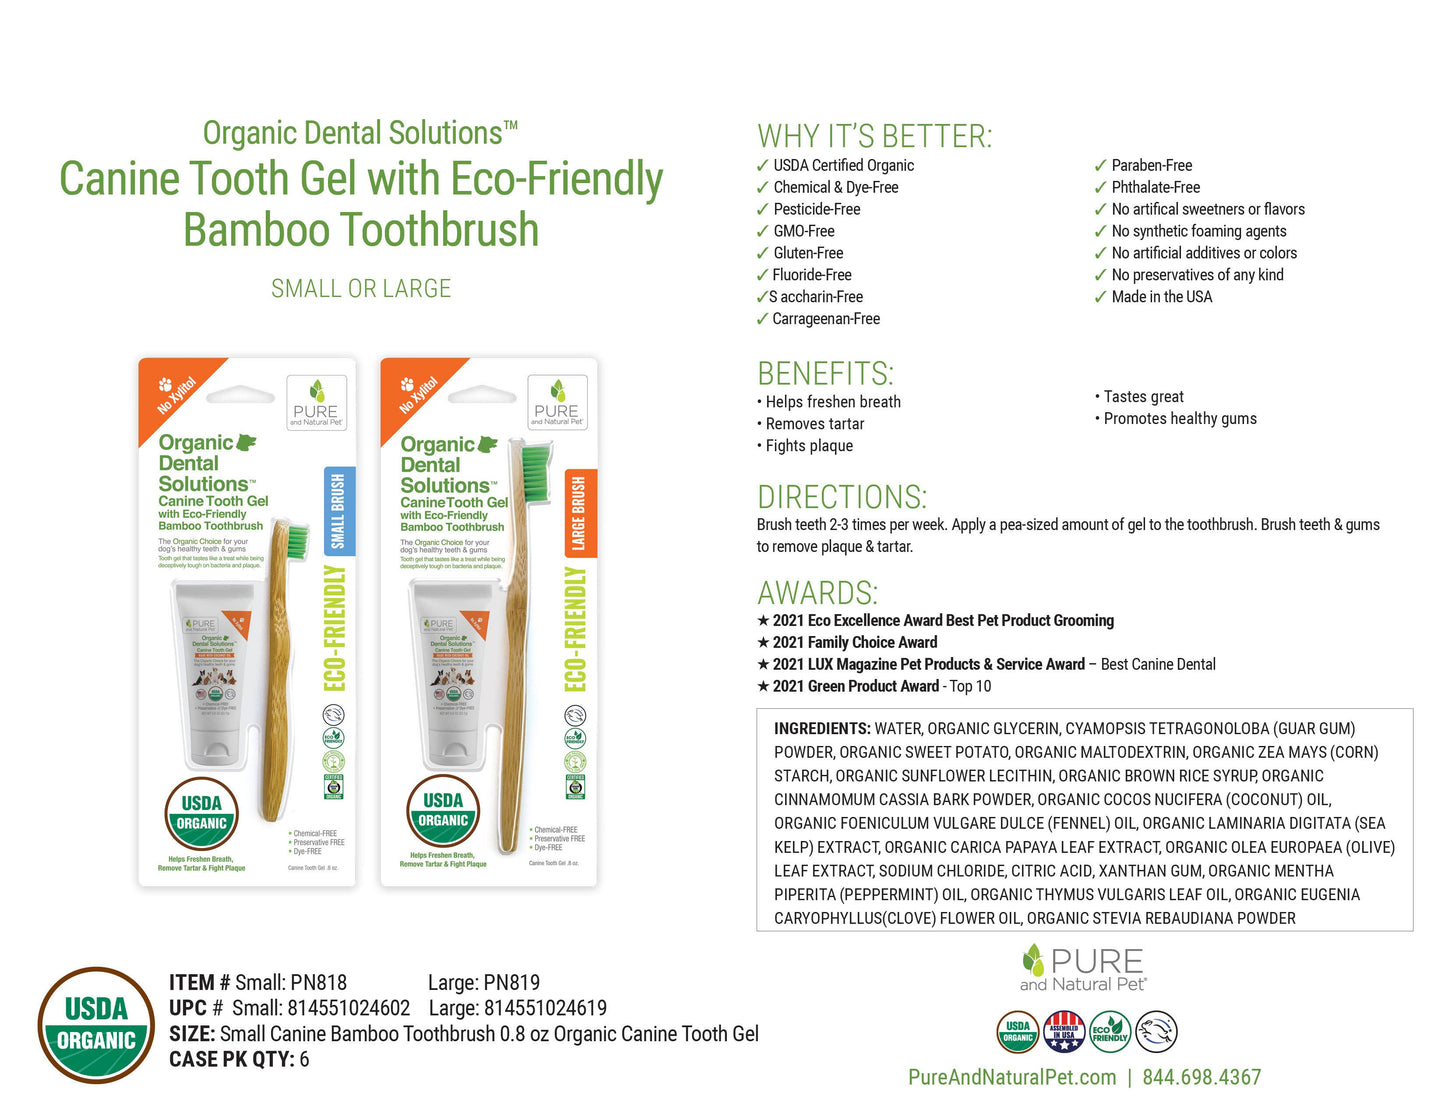 Pure and Natural Pet - Organic Tooth Gel & Bamboo Toothbrush for Dogs  - Large Kit  Image